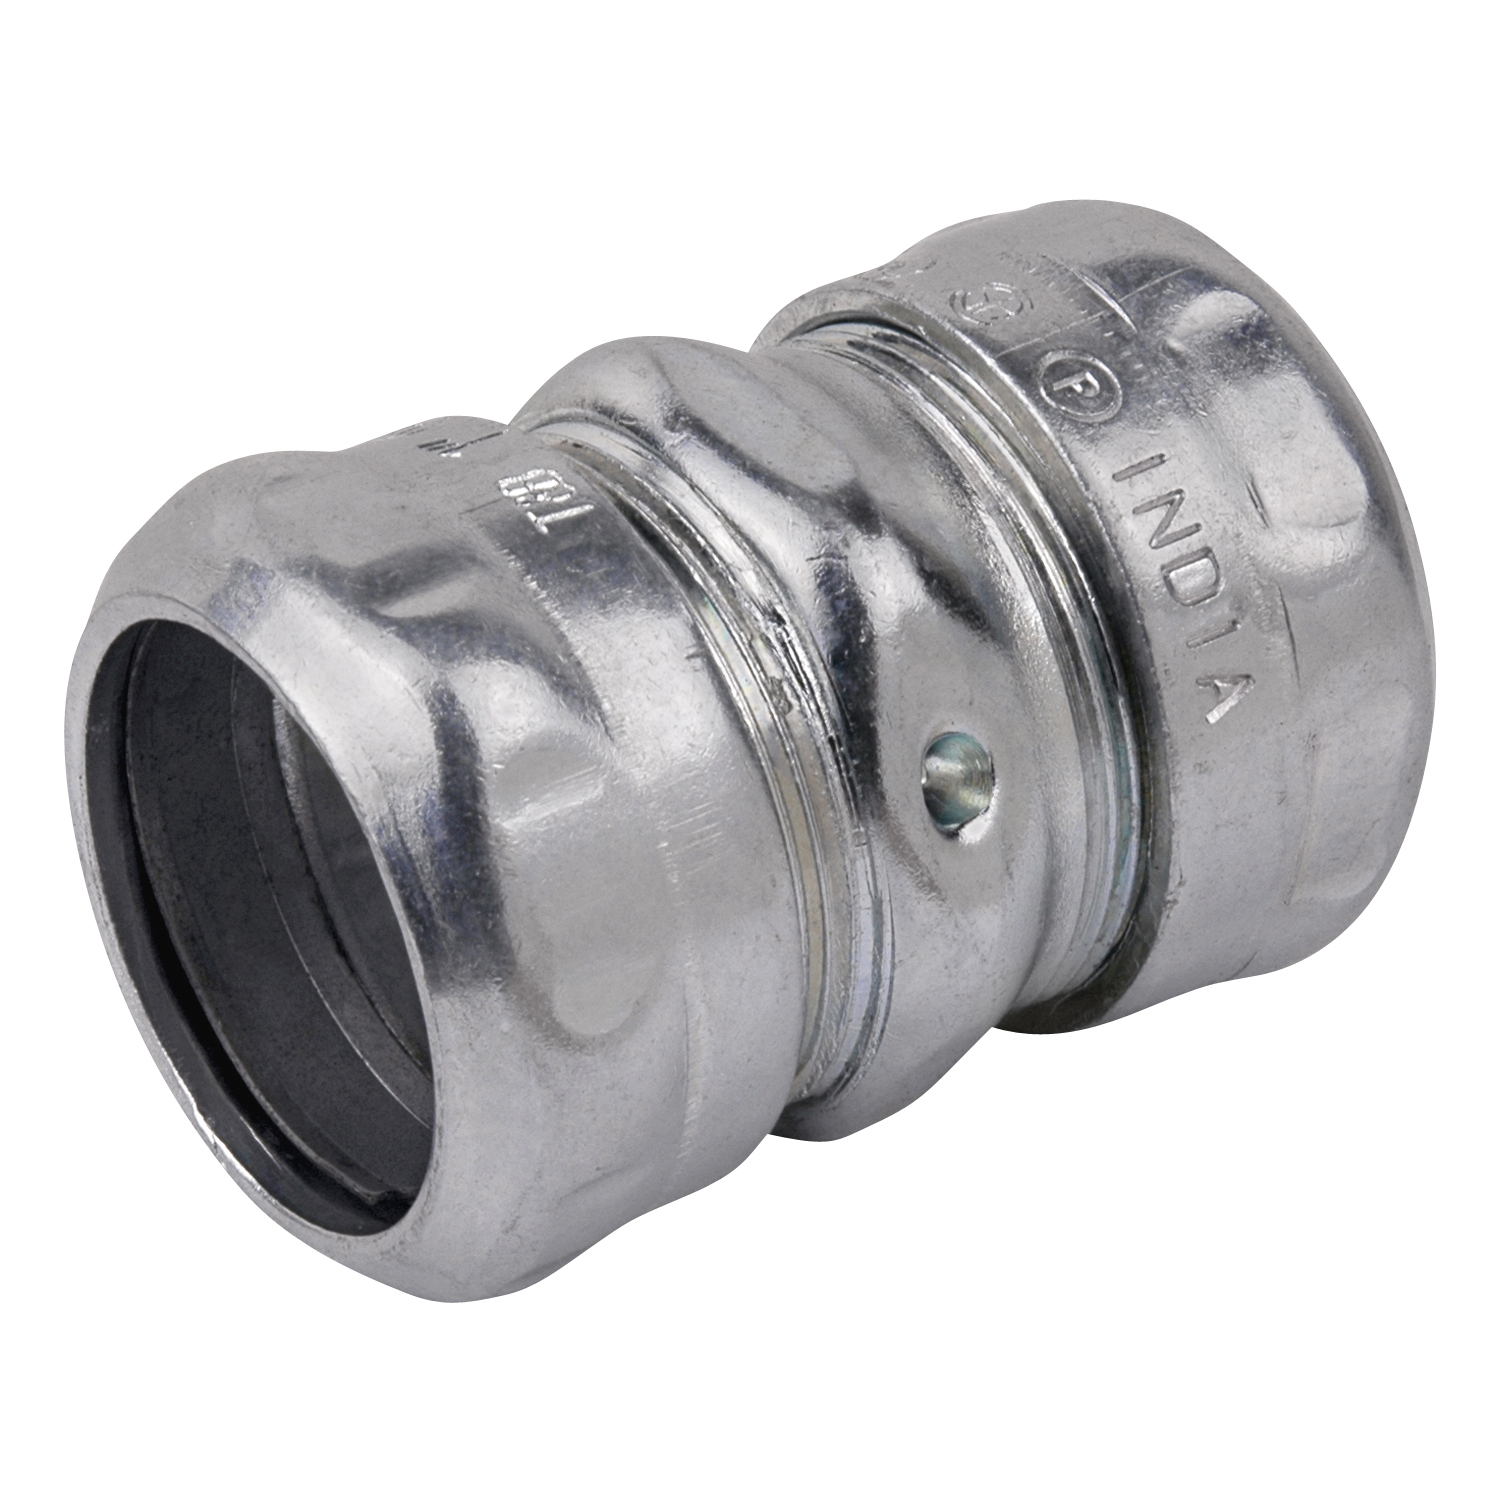 Thomas & Betts TK113A Steel City Compression Coupling